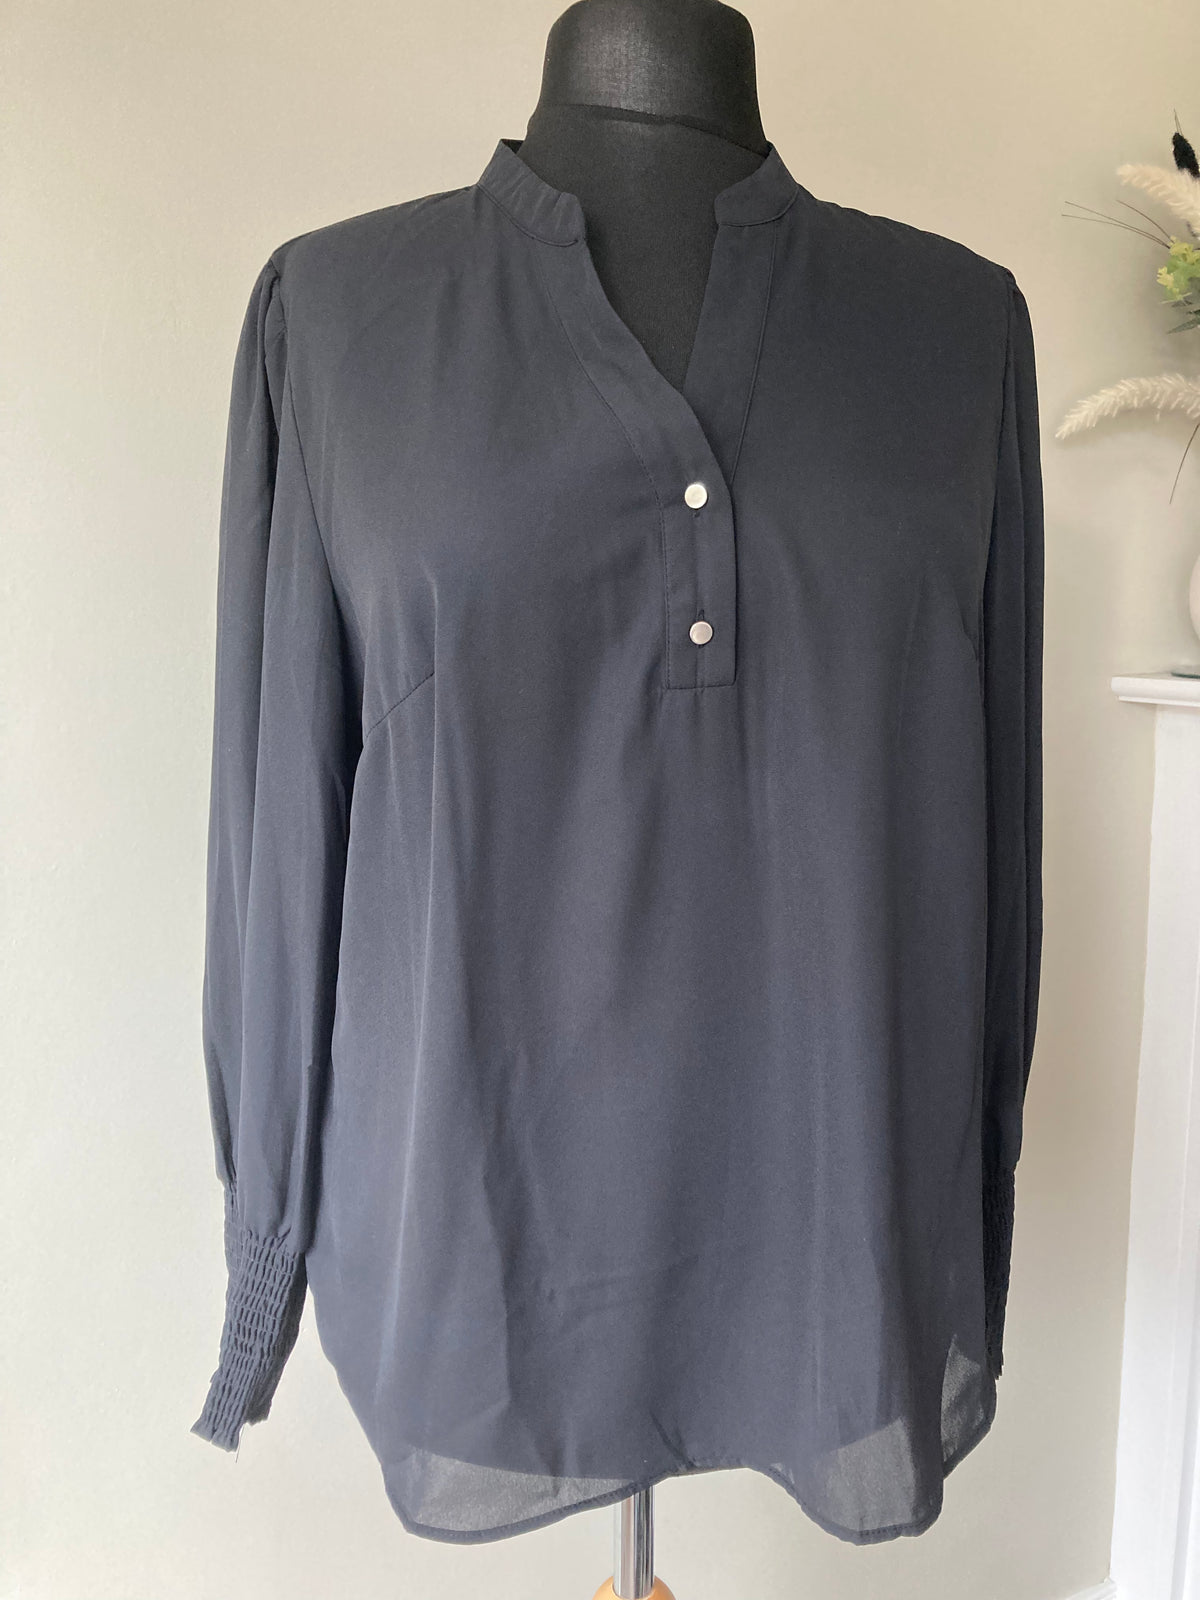 Black button up blouse by BPC - Size 20